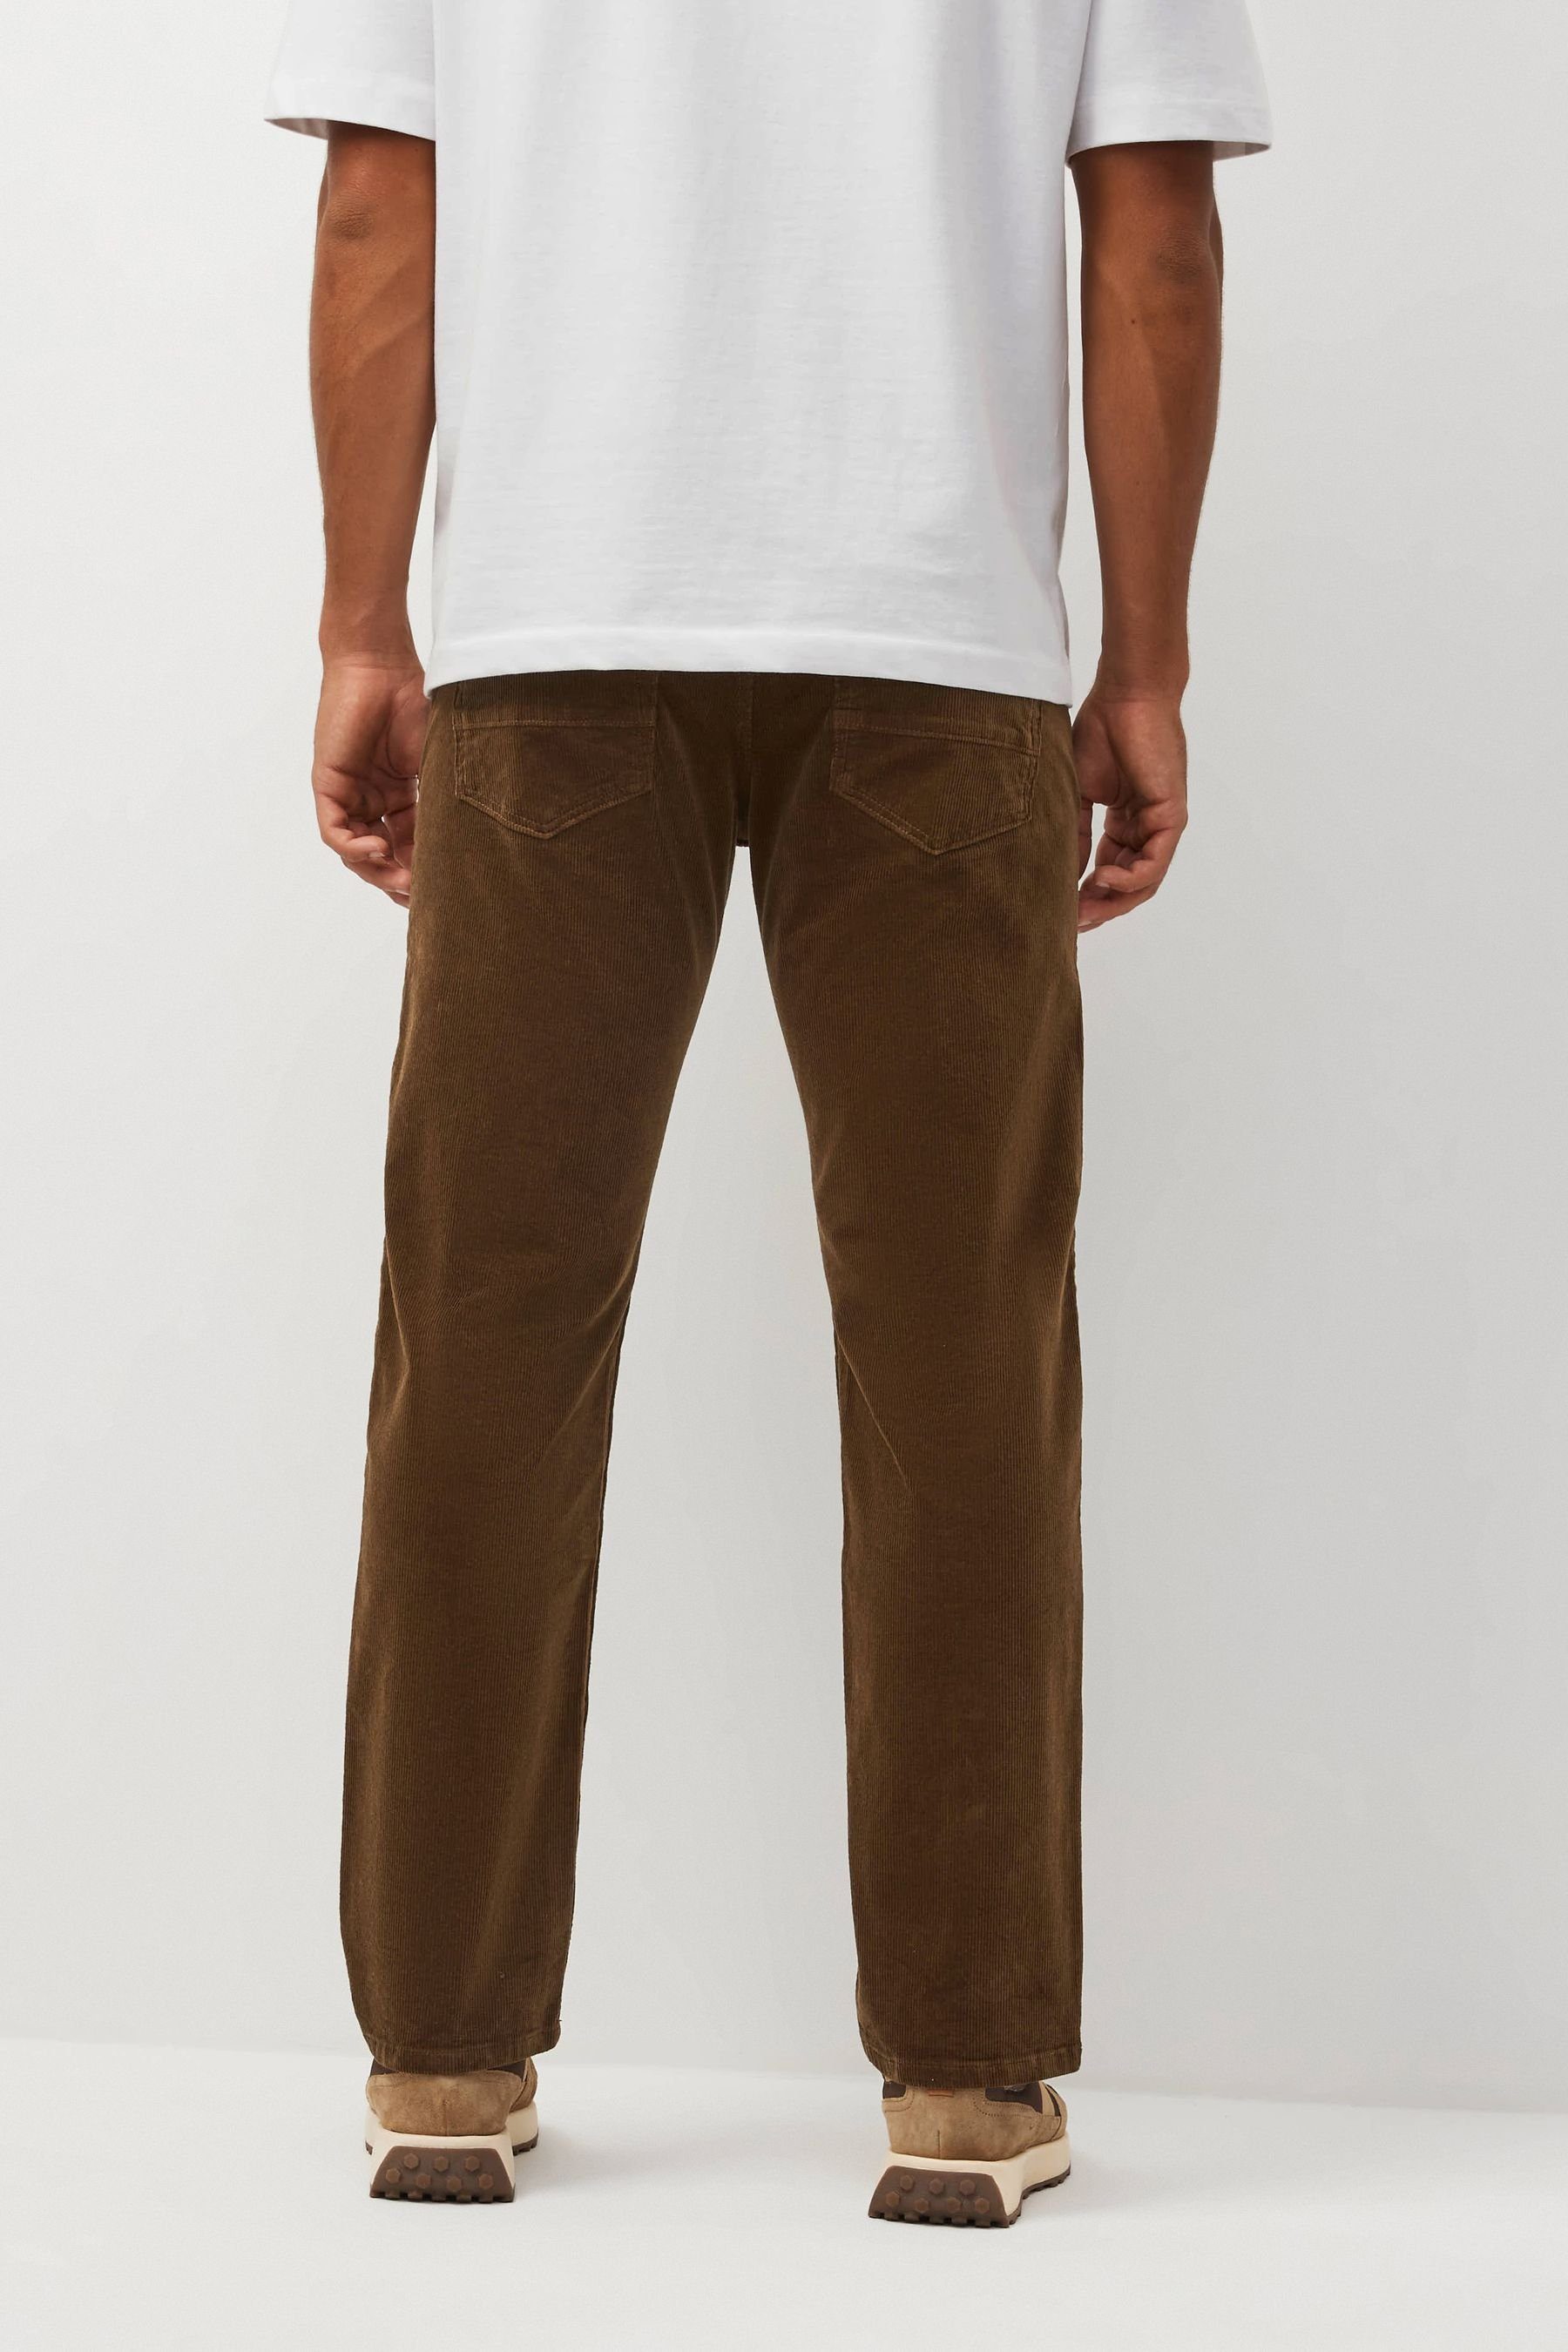 aus Next Cord Brown Fit Straight Straight-Jeans Tan 5-Pocket-Jeans im (1-tlg)